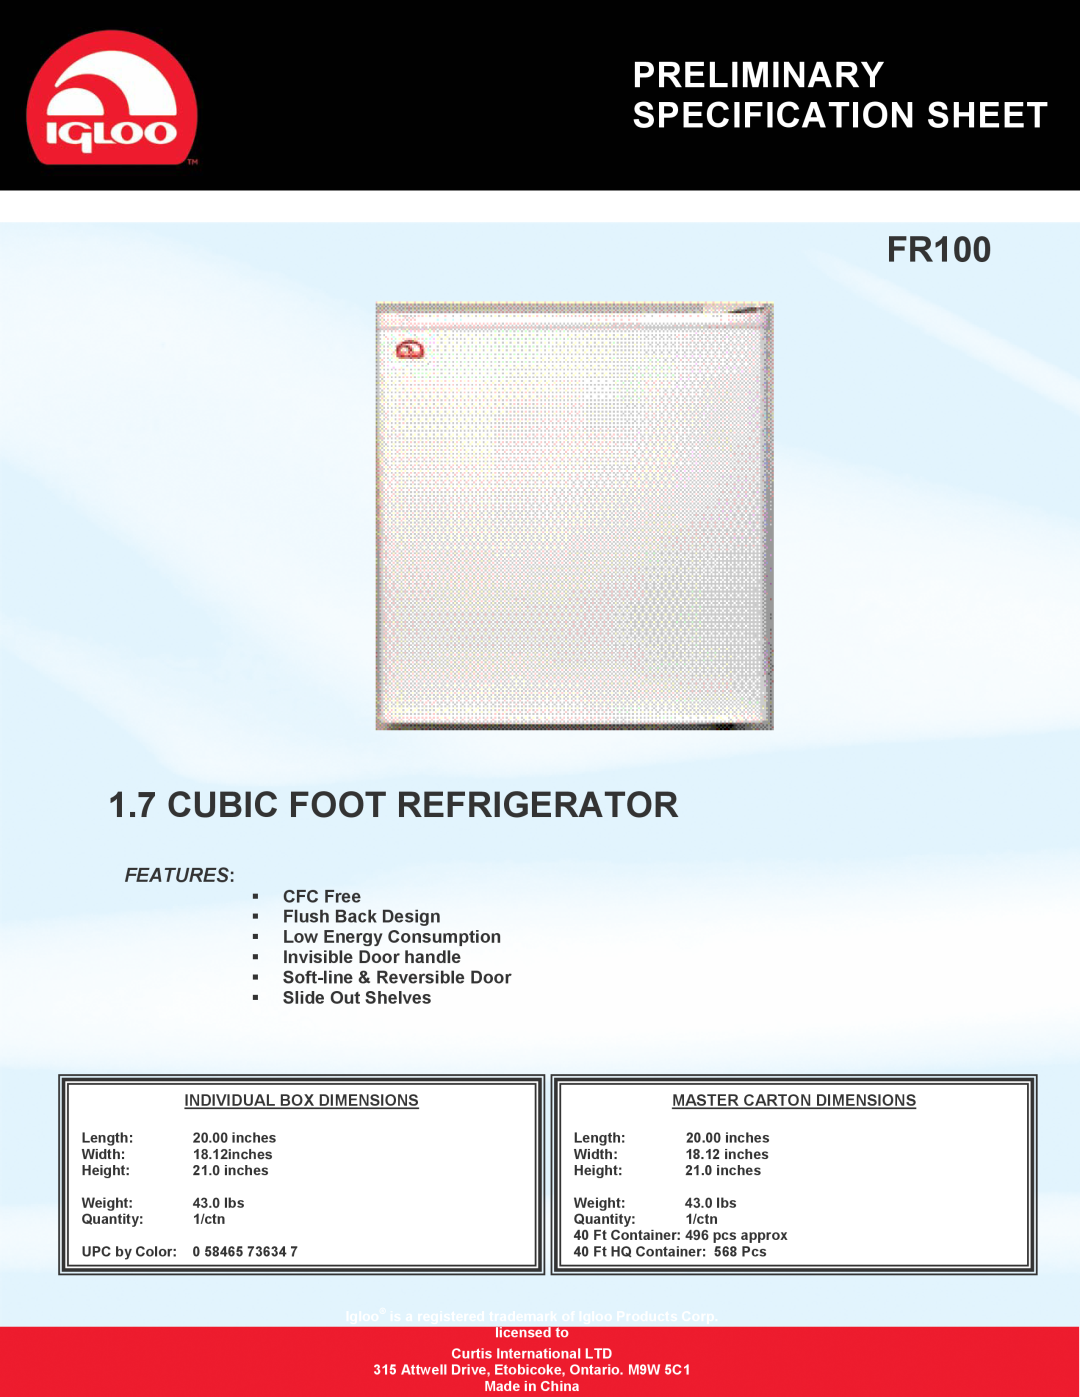 Igloo specifications Preliminary Specification Sheet, FR100 1.7 CUBIC FOOT REFRIGERATOR, Features, Made in China 